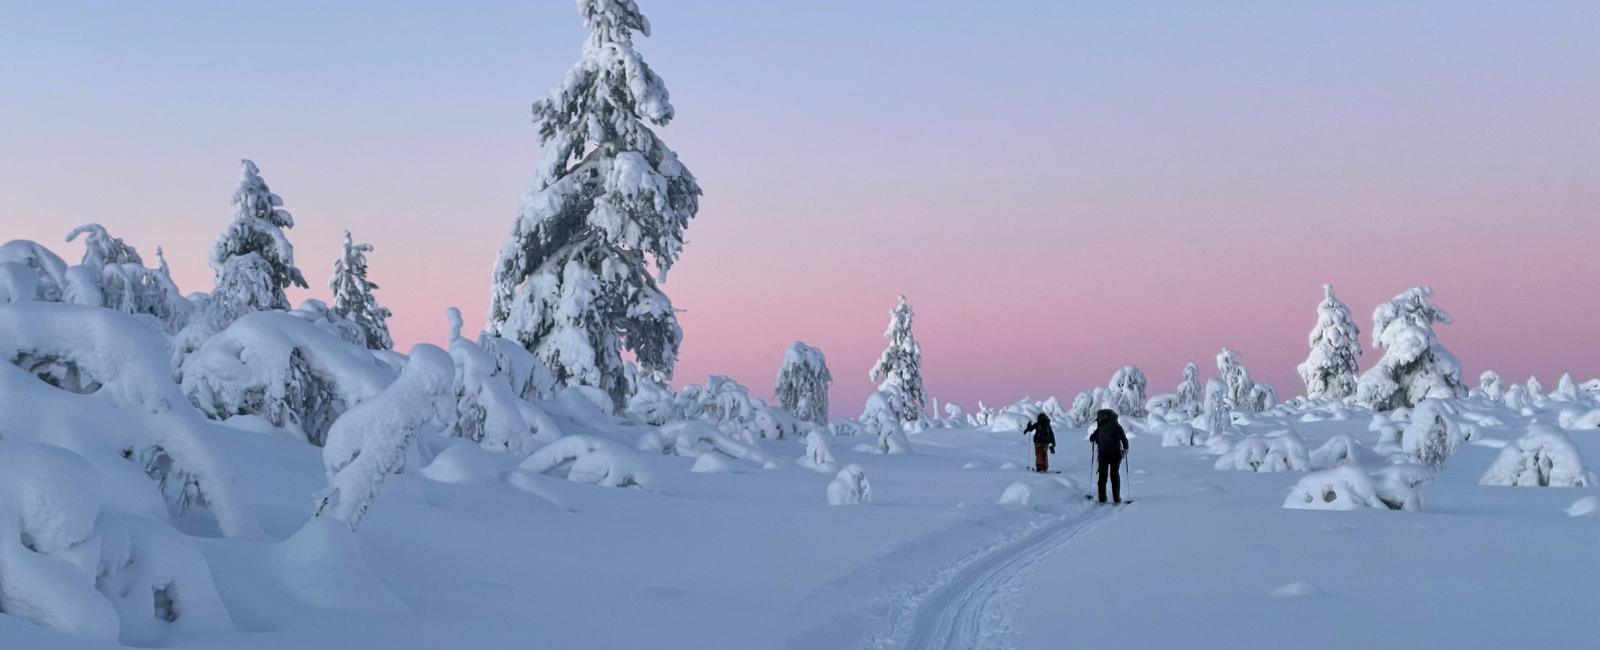 People walking in the snow in Lapland, Finland